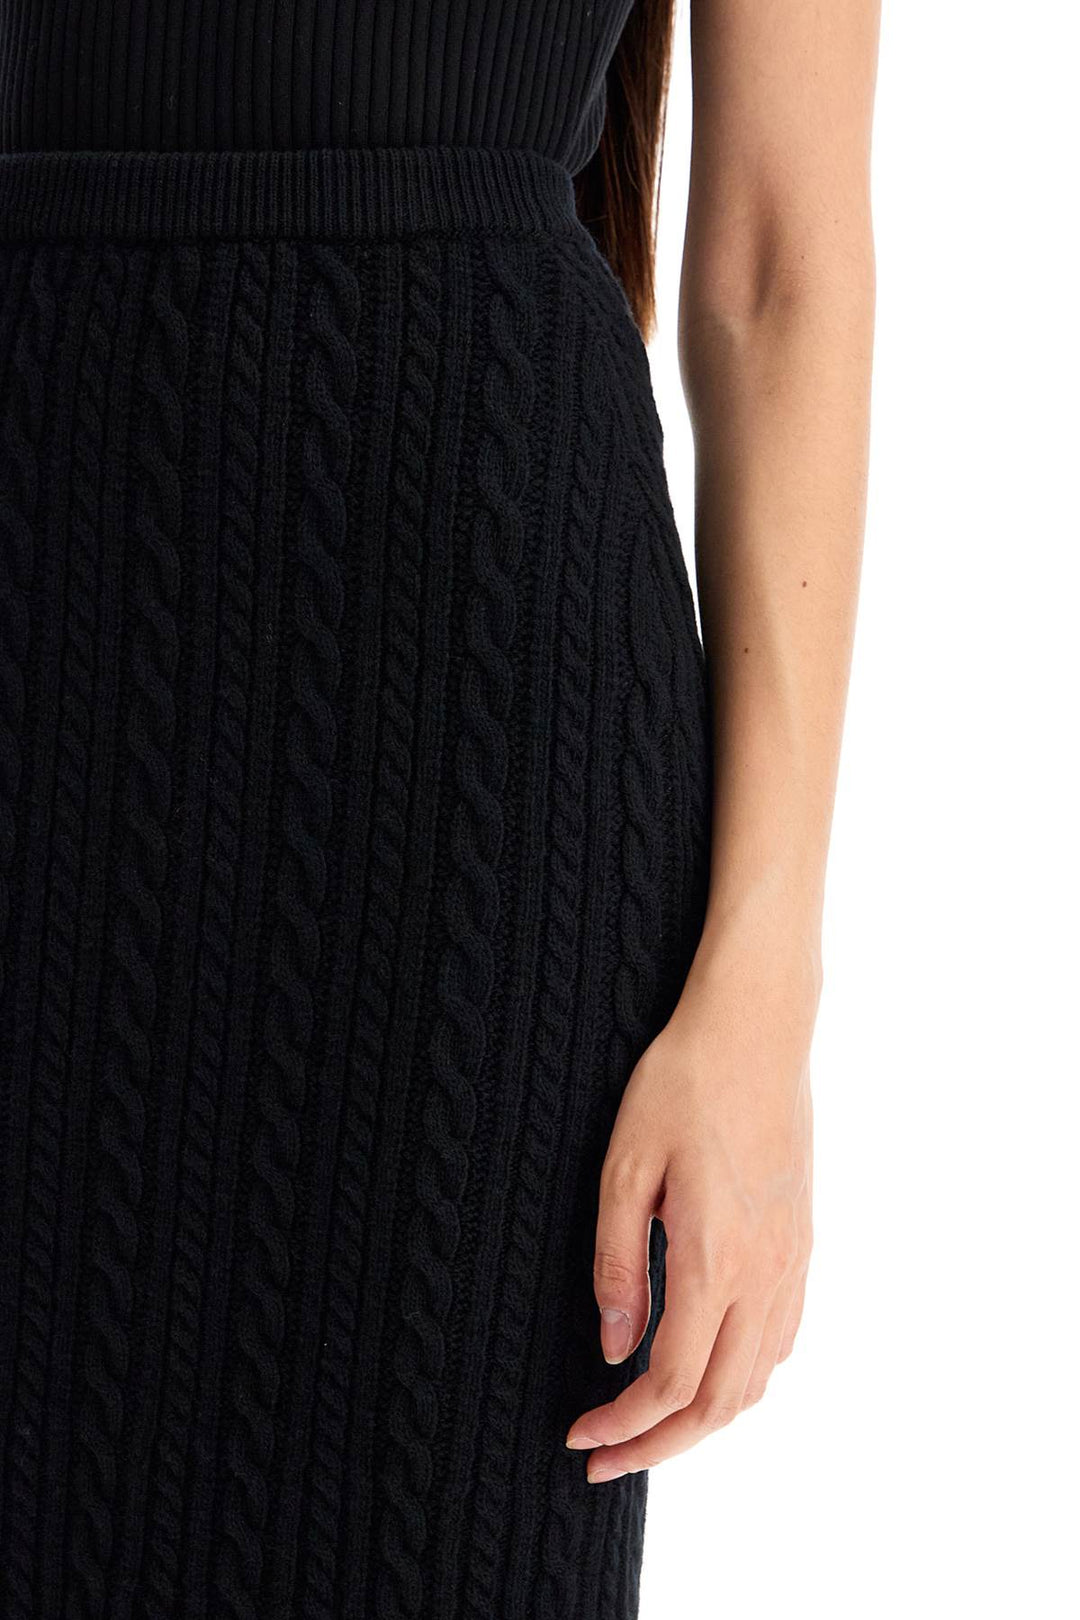 Alessandra Rich Knitted Midi Skirt With Cable Knit   Black